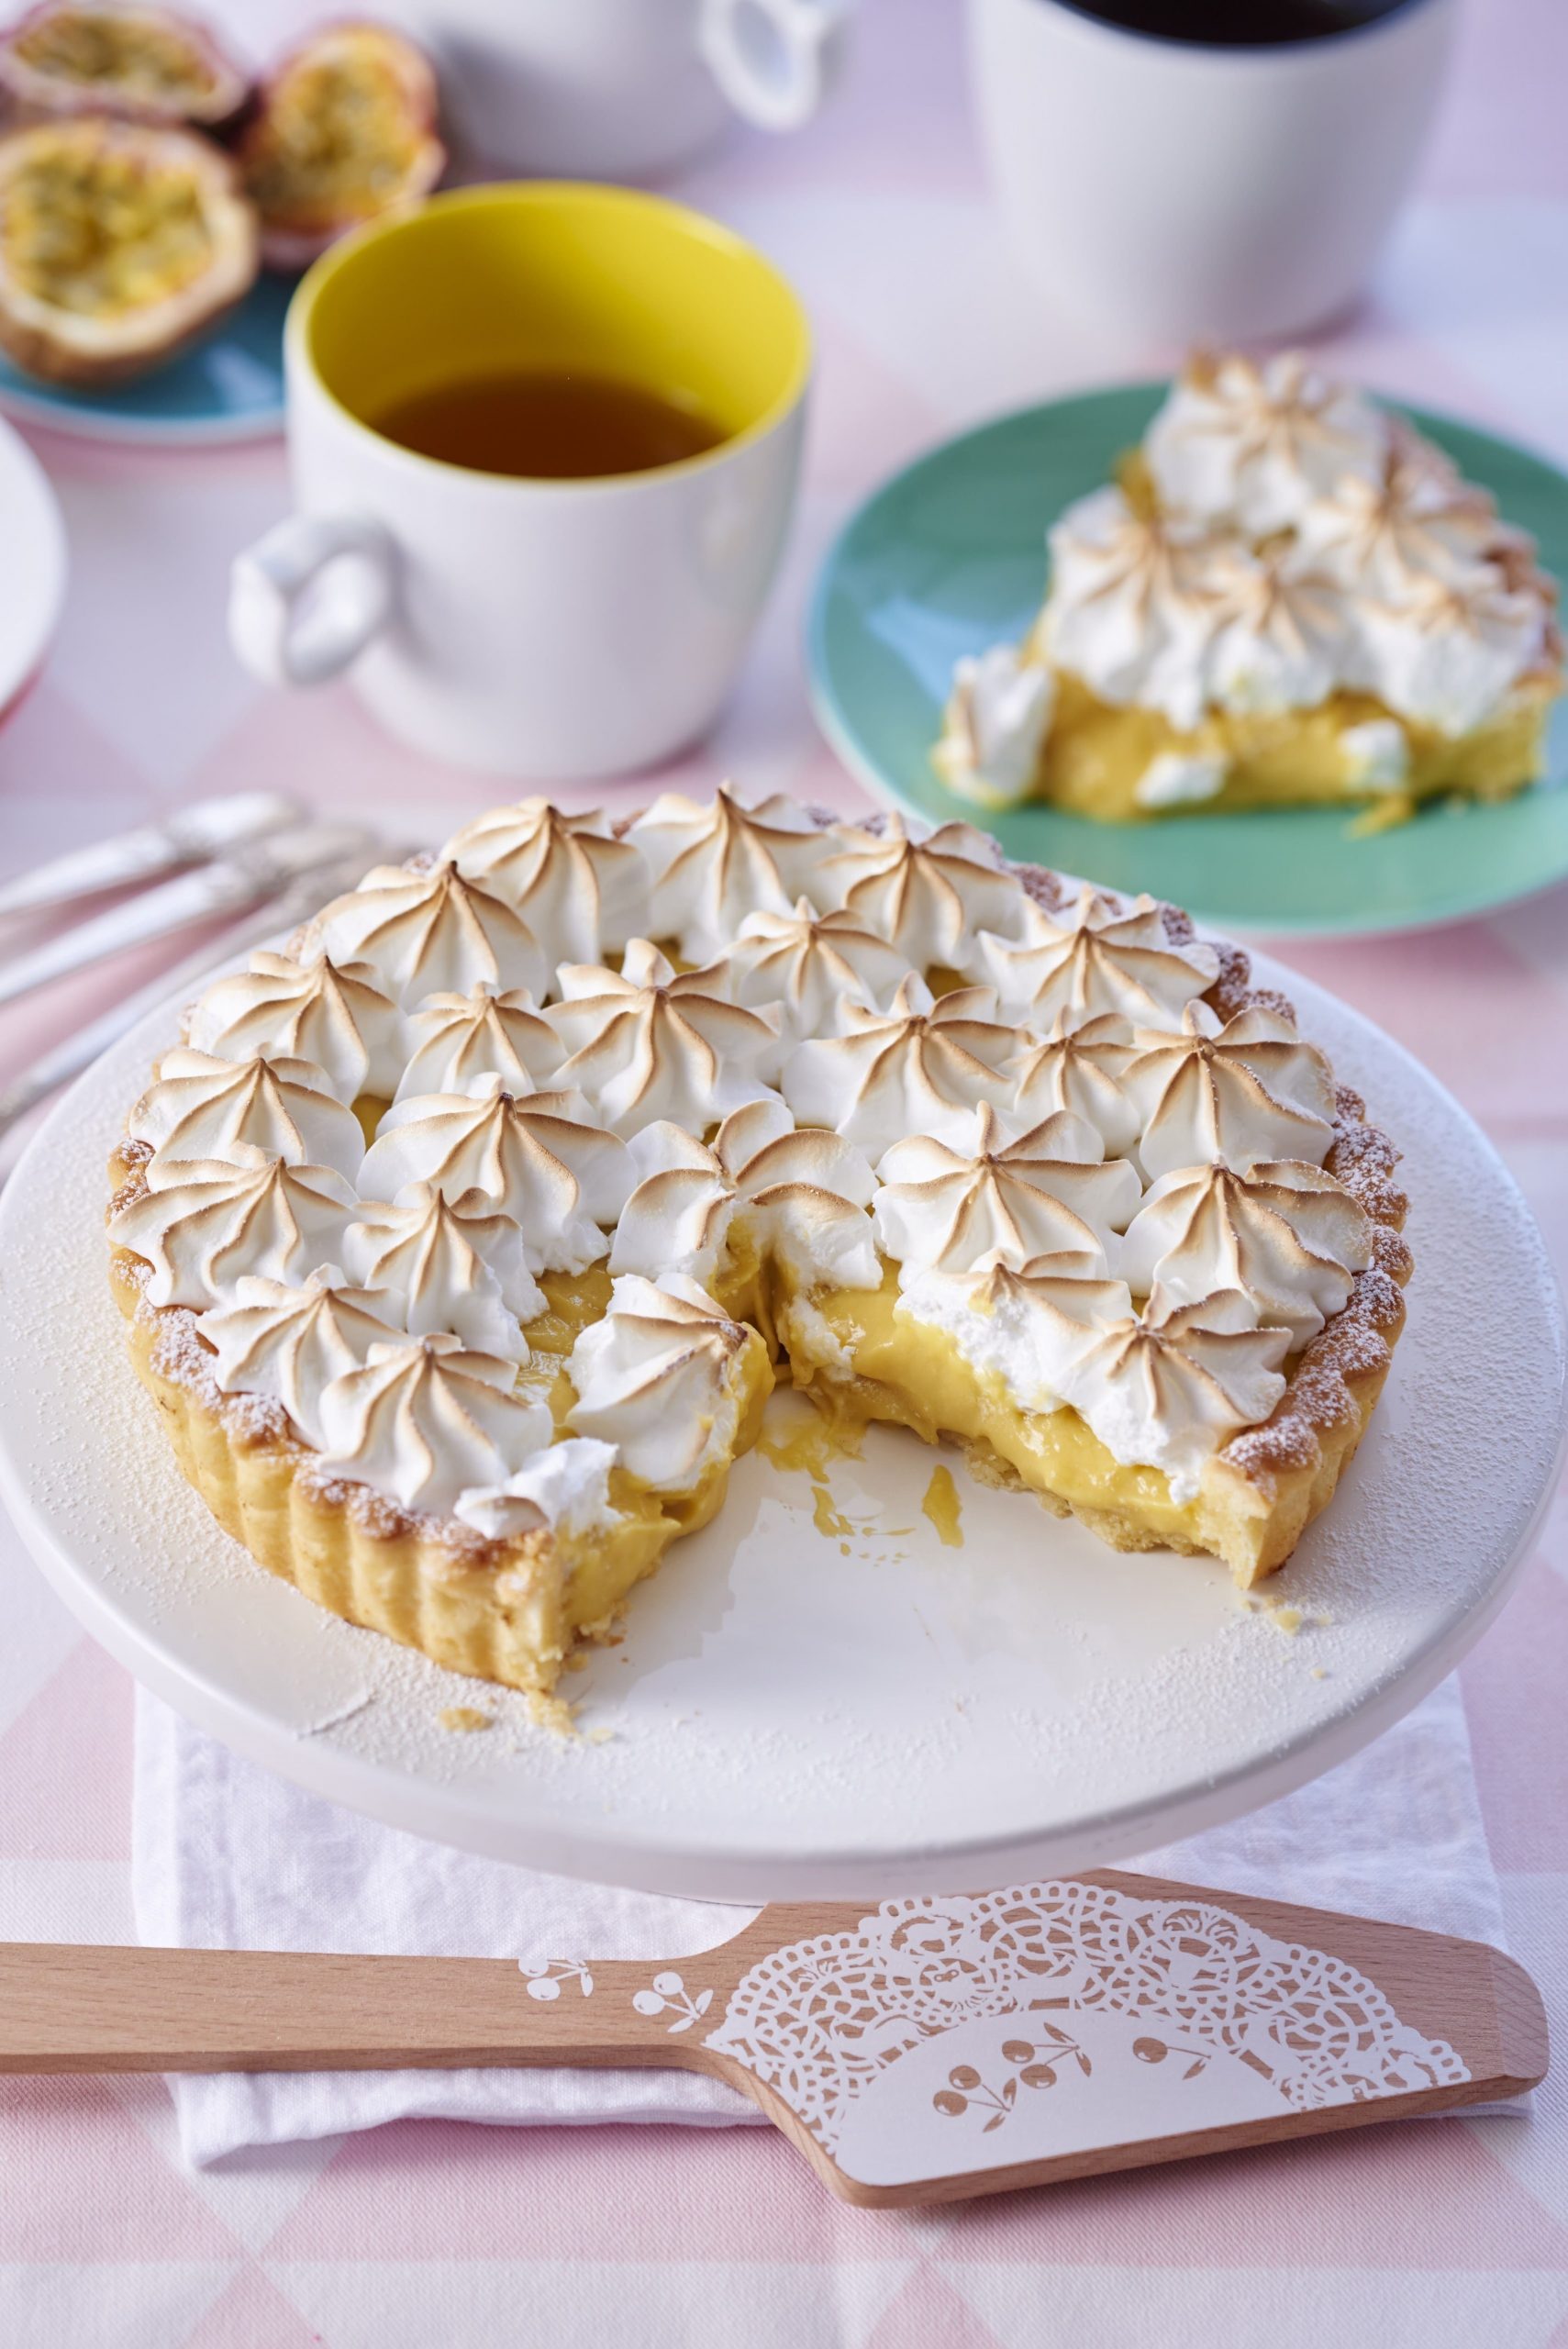 How Do You Make Lemon Meringue Pie? Try These Tips To ...